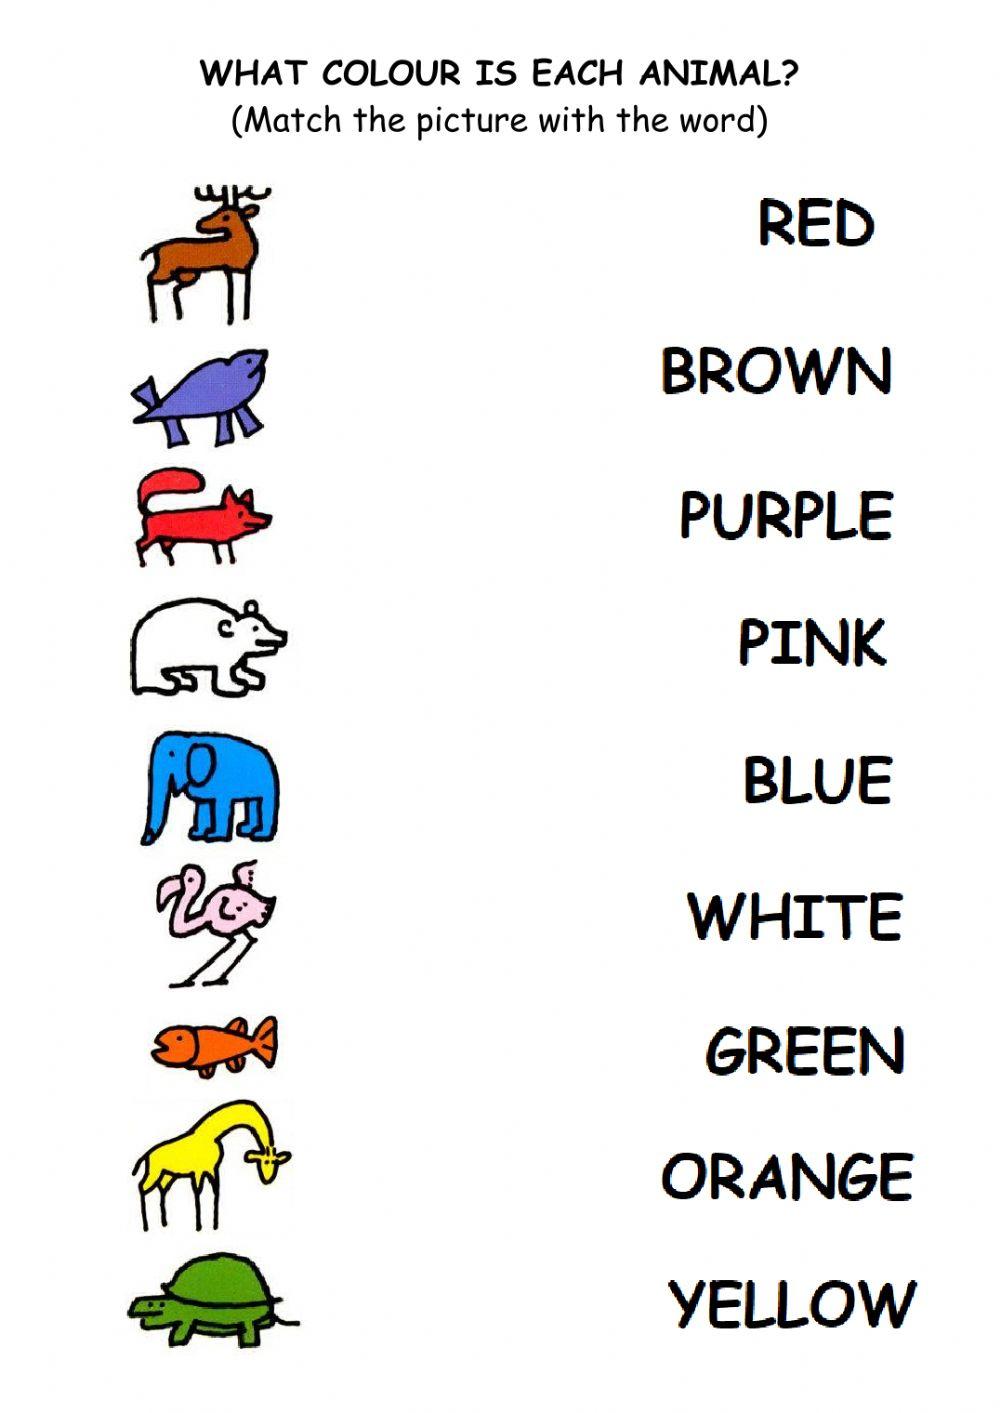 WHAT COLOUR IS EACH ANIMAL?